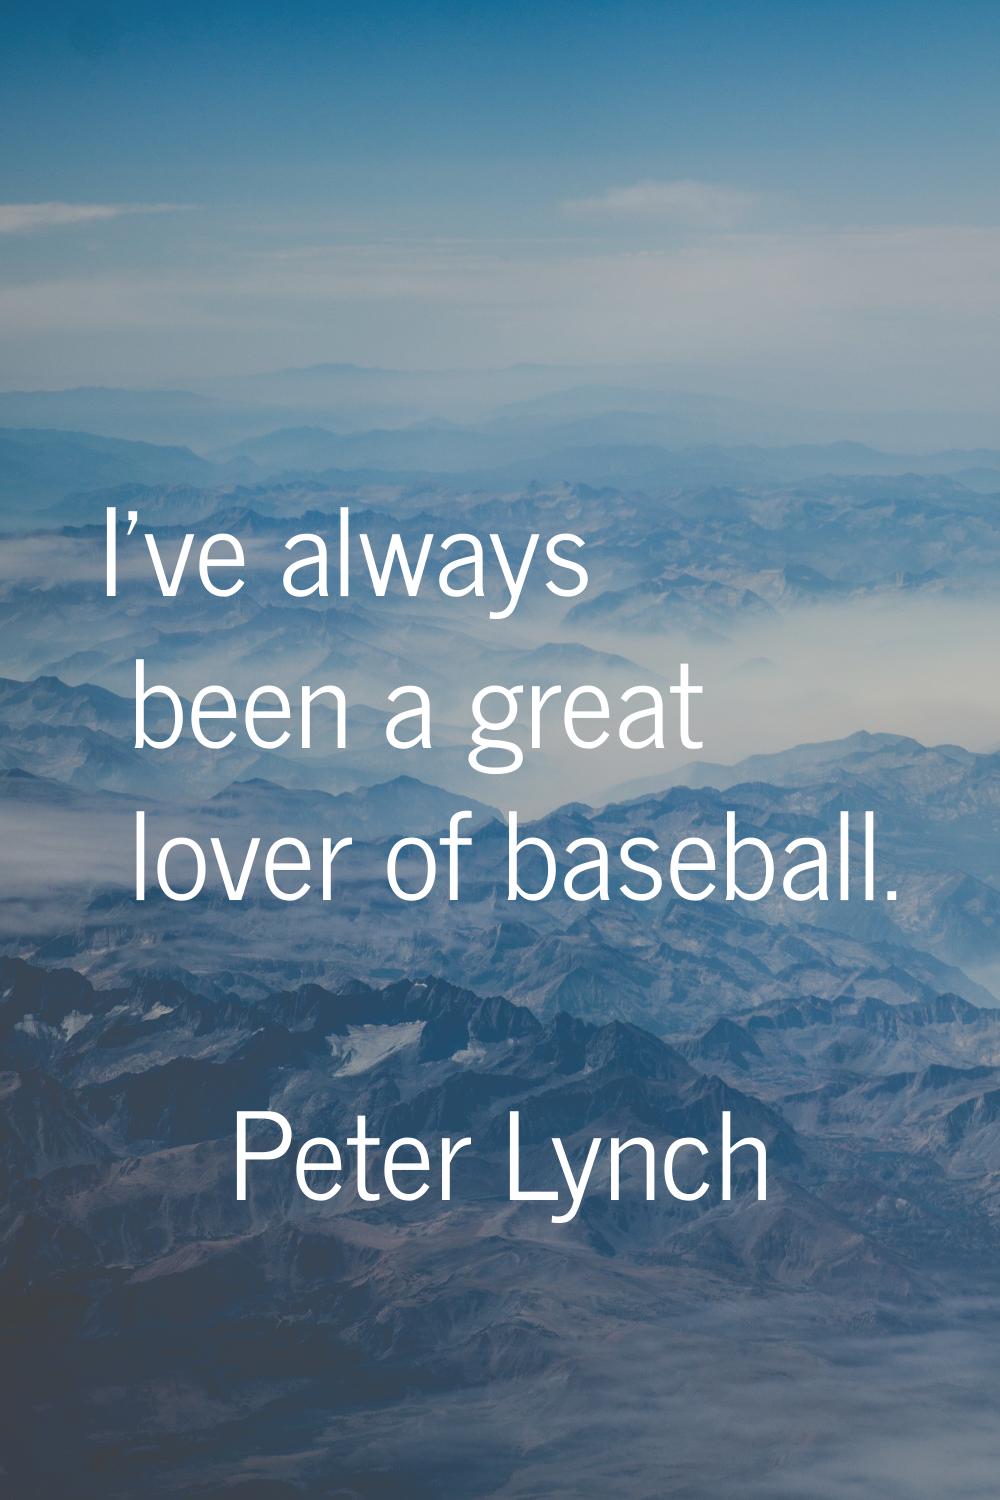 I've always been a great lover of baseball.